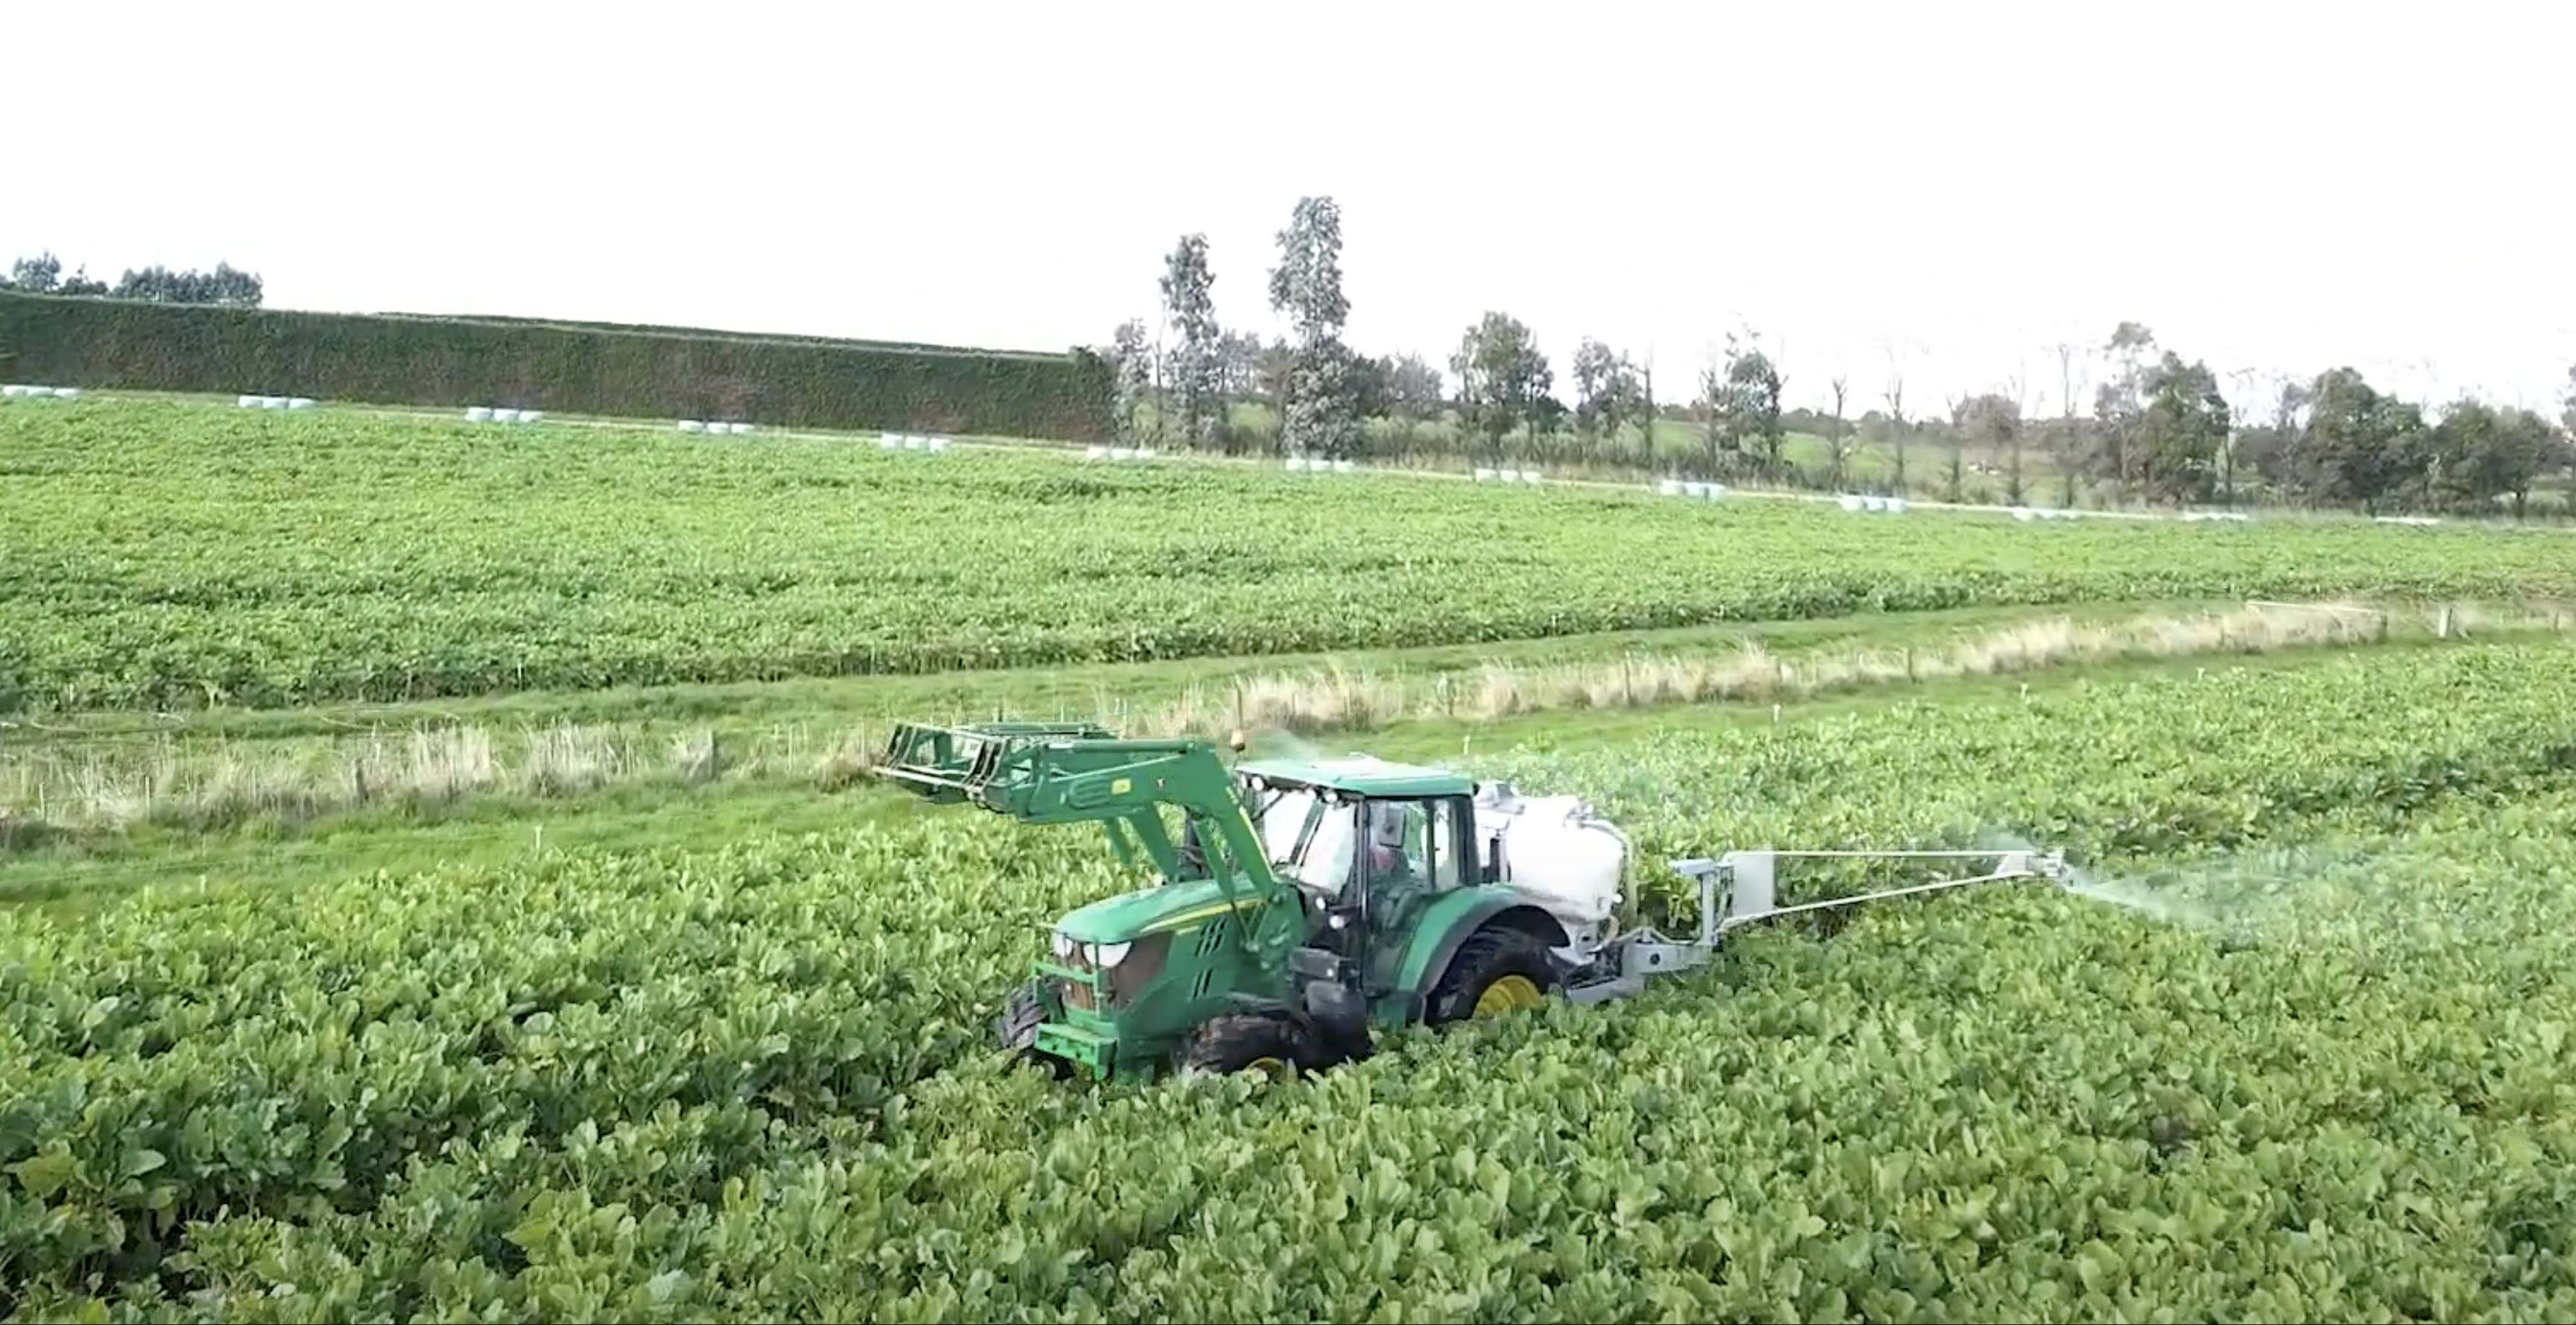 Marshalls reduce nitrogen inputs by 70% with Fish It